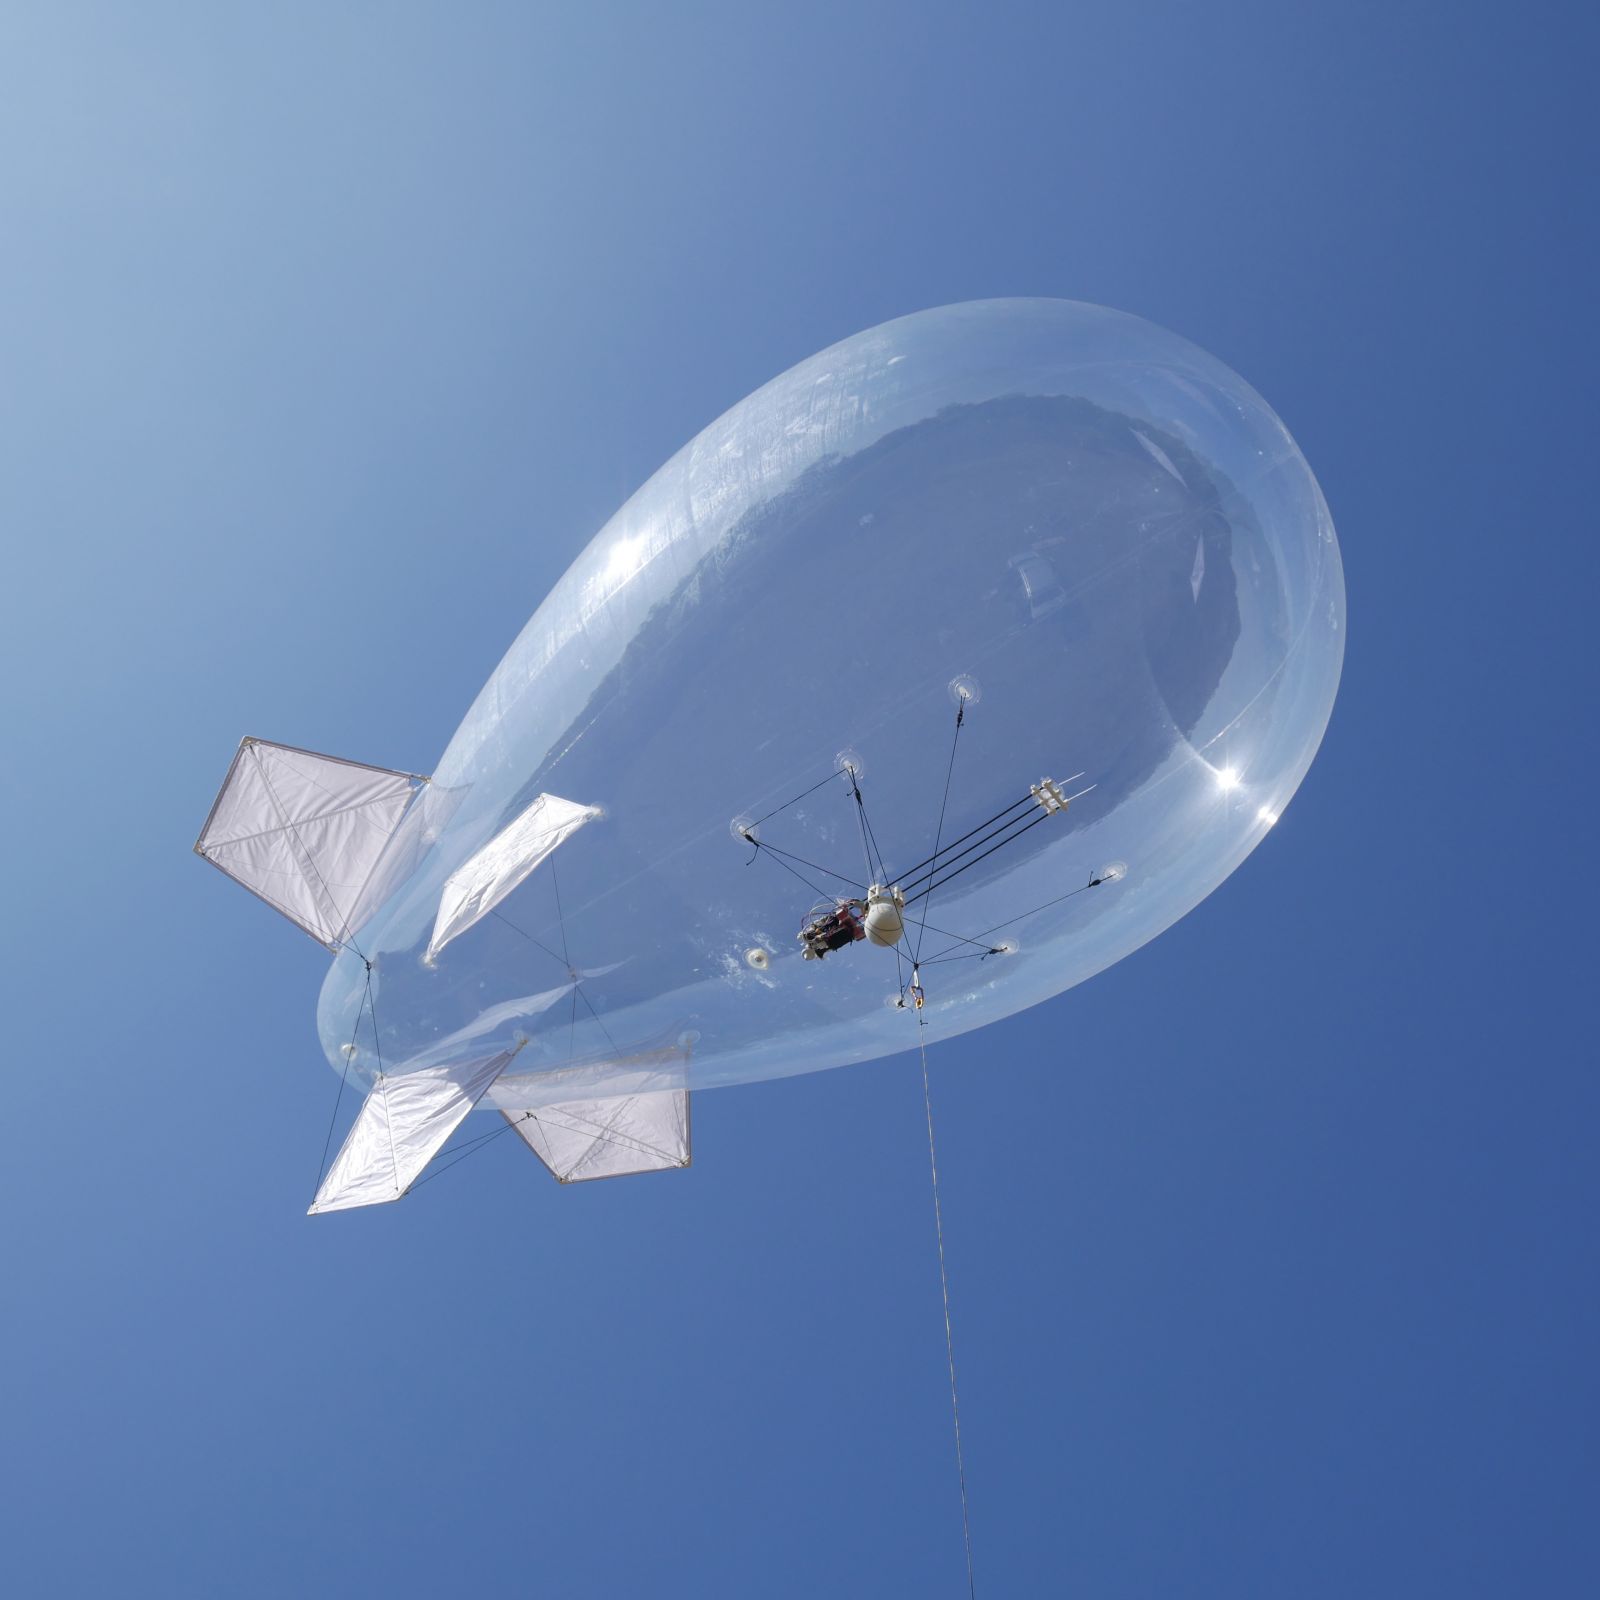 Tethered balloons, an innovative on-board video surveillance solution